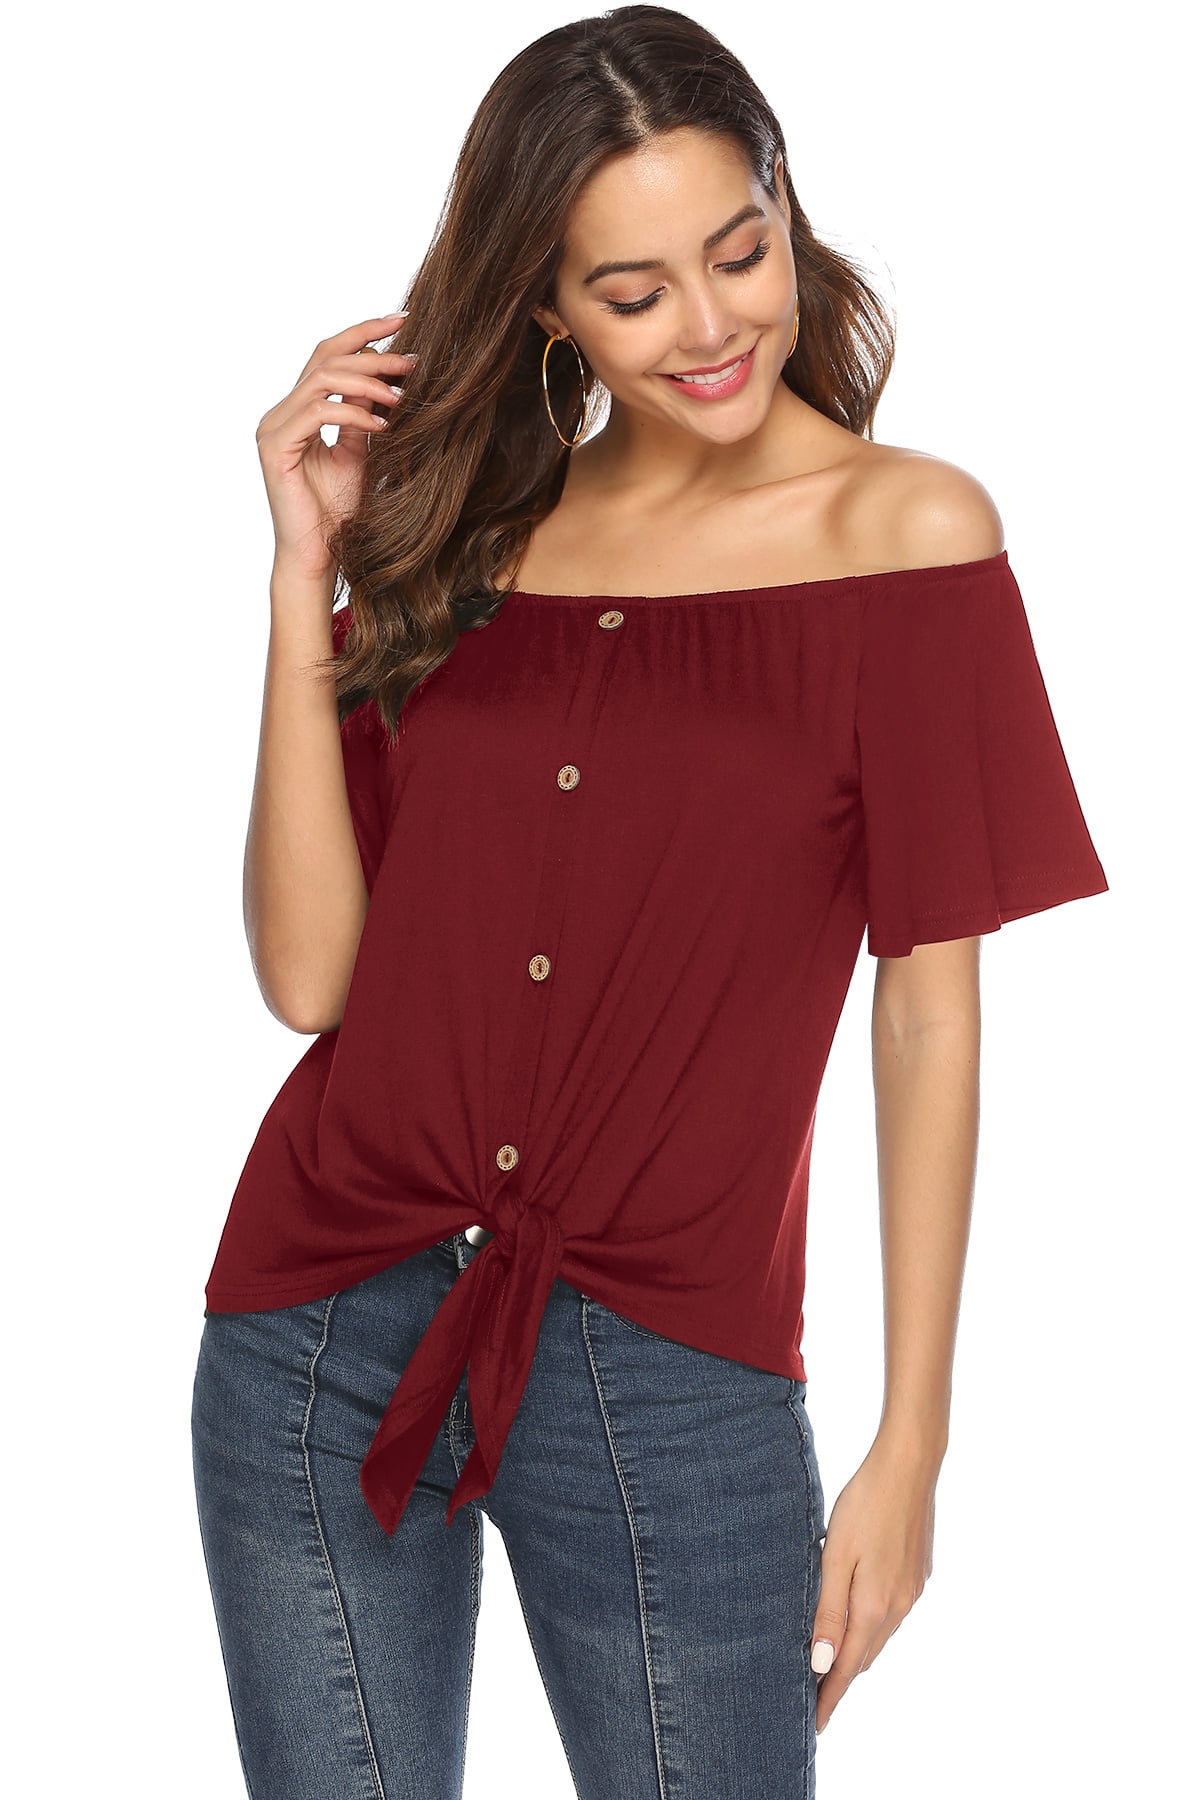 Lilly Posh - Lilly Posh Women's Off Shoulder Button Down Blouse with ...